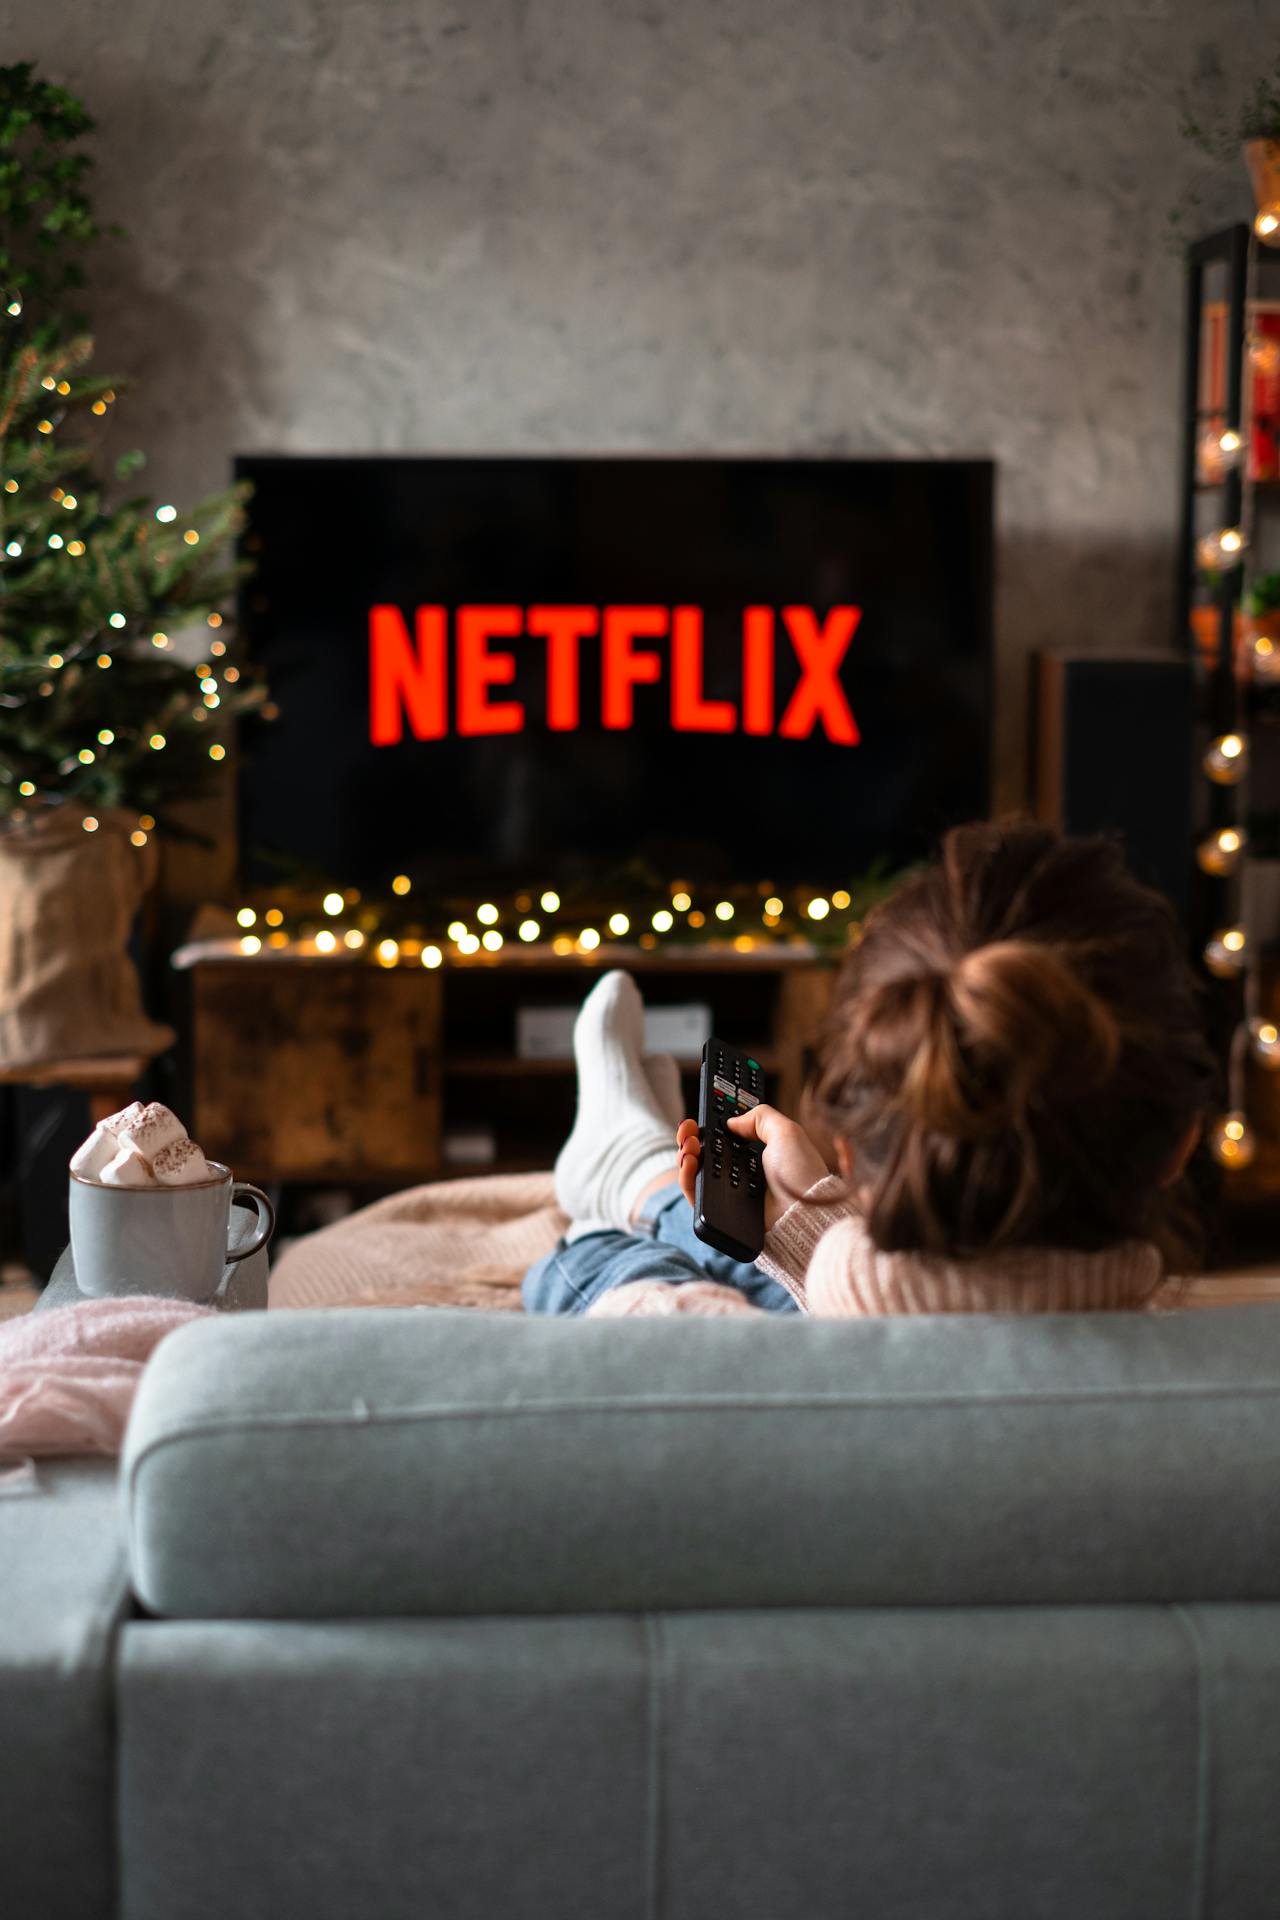 A woman is watching Netflix on TV while sitting in couch.